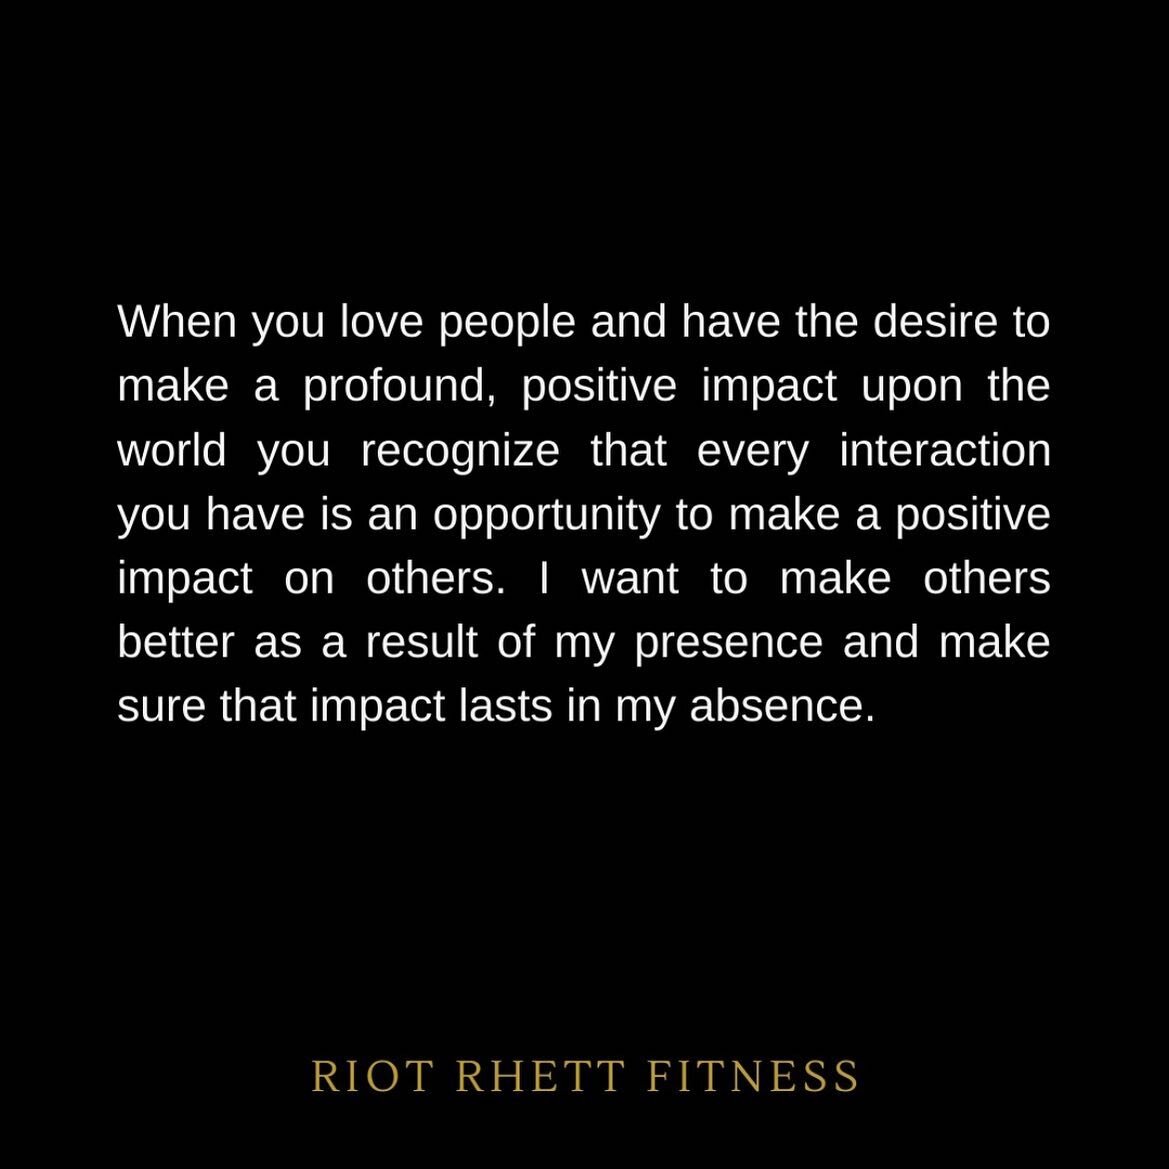 When you love people and have the desire to make a profound, positive impact upon the world you recognize that every interaction you have is an opportunity to make a positive impact on others. I want to make others better as a result of my presence a